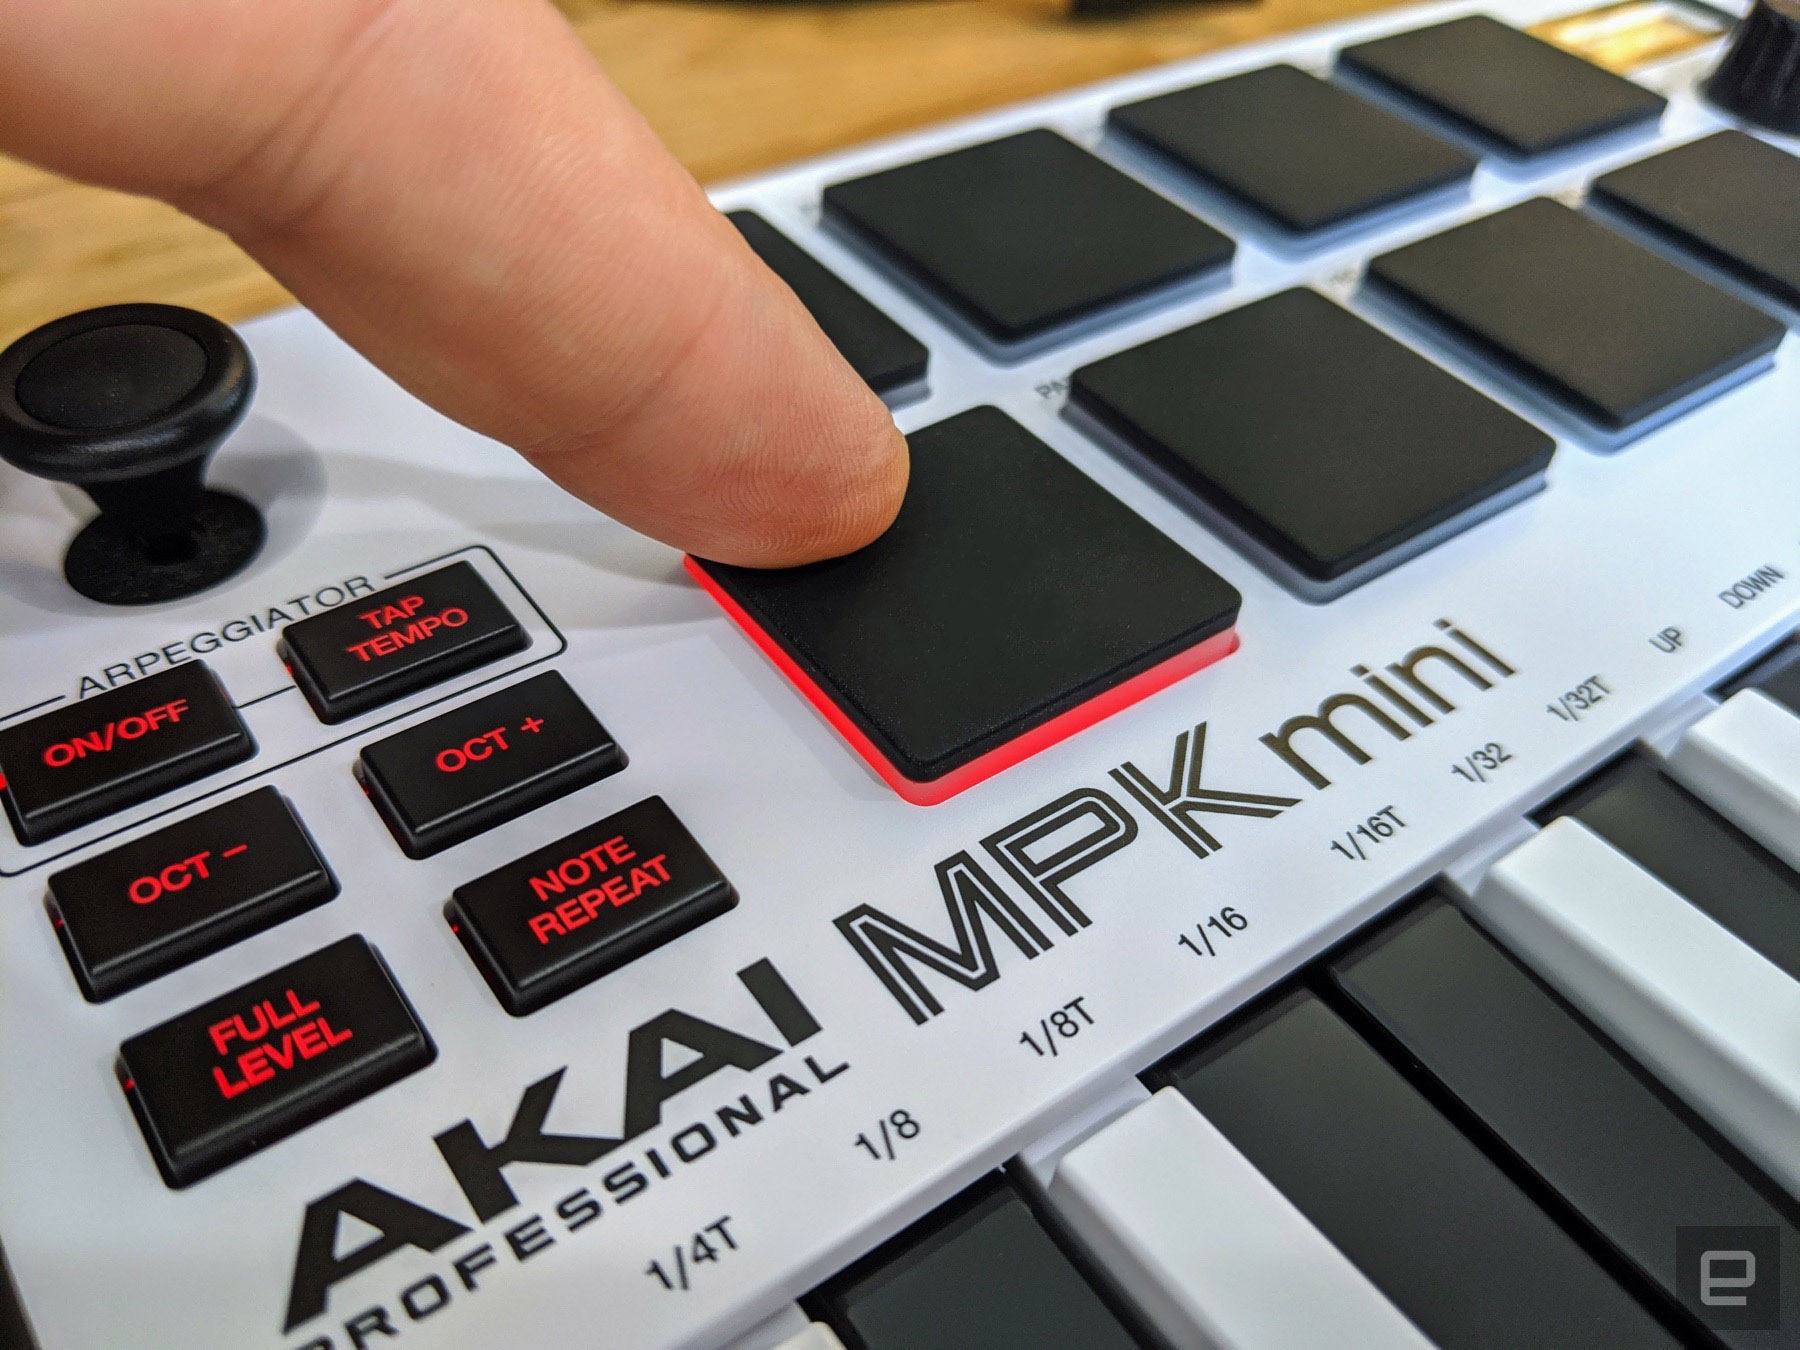 Akai reveals a bigger sibling for one of the best budget MIDI controllers | DeviceDaily.com